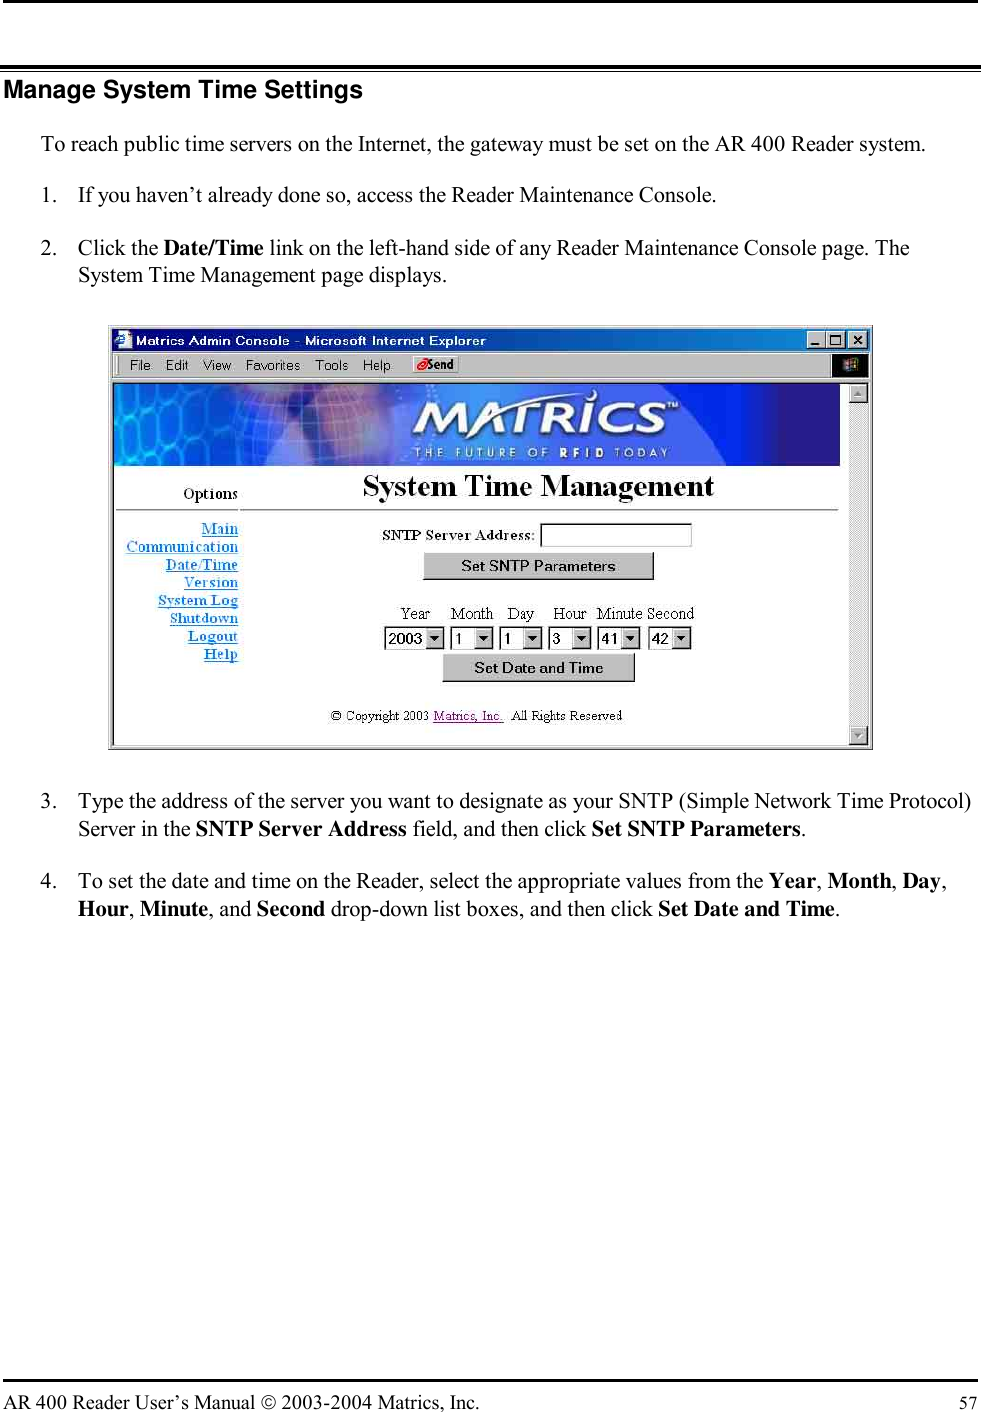   AR 400 Reader User’s Manual  2003-2004 Matrics, Inc.  57 Manage System Time Settings To reach public time servers on the Internet, the gateway must be set on the AR 400 Reader system. 1.  If you haven’t already done so, access the Reader Maintenance Console. 2. Click the Date/Time link on the left-hand side of any Reader Maintenance Console page. The System Time Management page displays.  3.  Type the address of the server you want to designate as your SNTP (Simple Network Time Protocol) Server in the SNTP Server Address field, and then click Set SNTP Parameters.  4.  To set the date and time on the Reader, select the appropriate values from the Year, Month, Day, Hour, Minute, and Second drop-down list boxes, and then click Set Date and Time. 